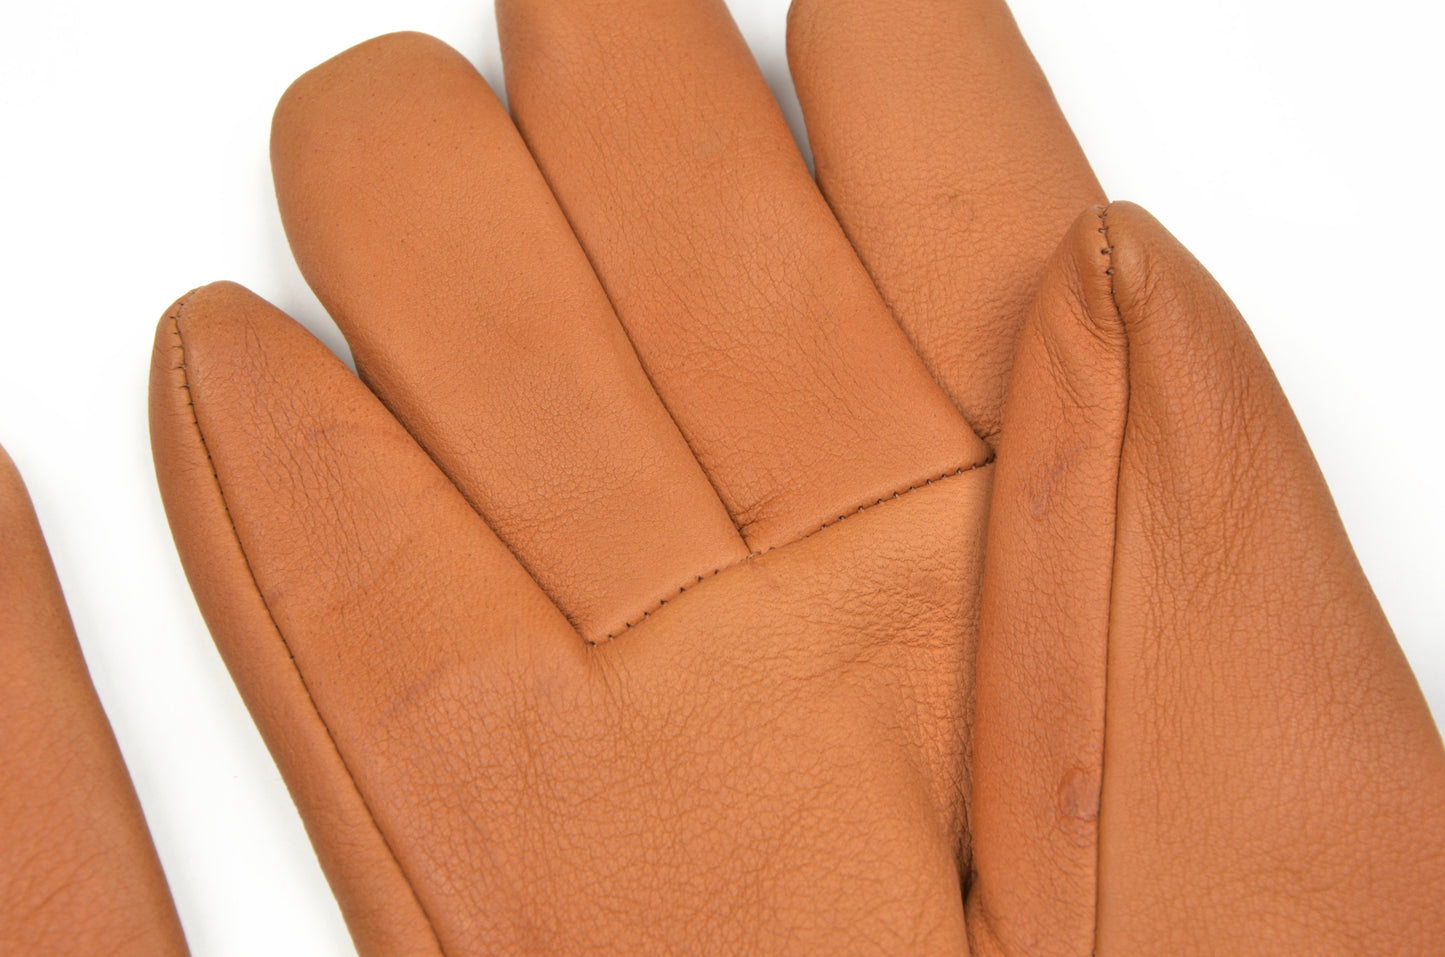 Lined Chamois/Goat Leather Gloves Size 8 - Whiskey